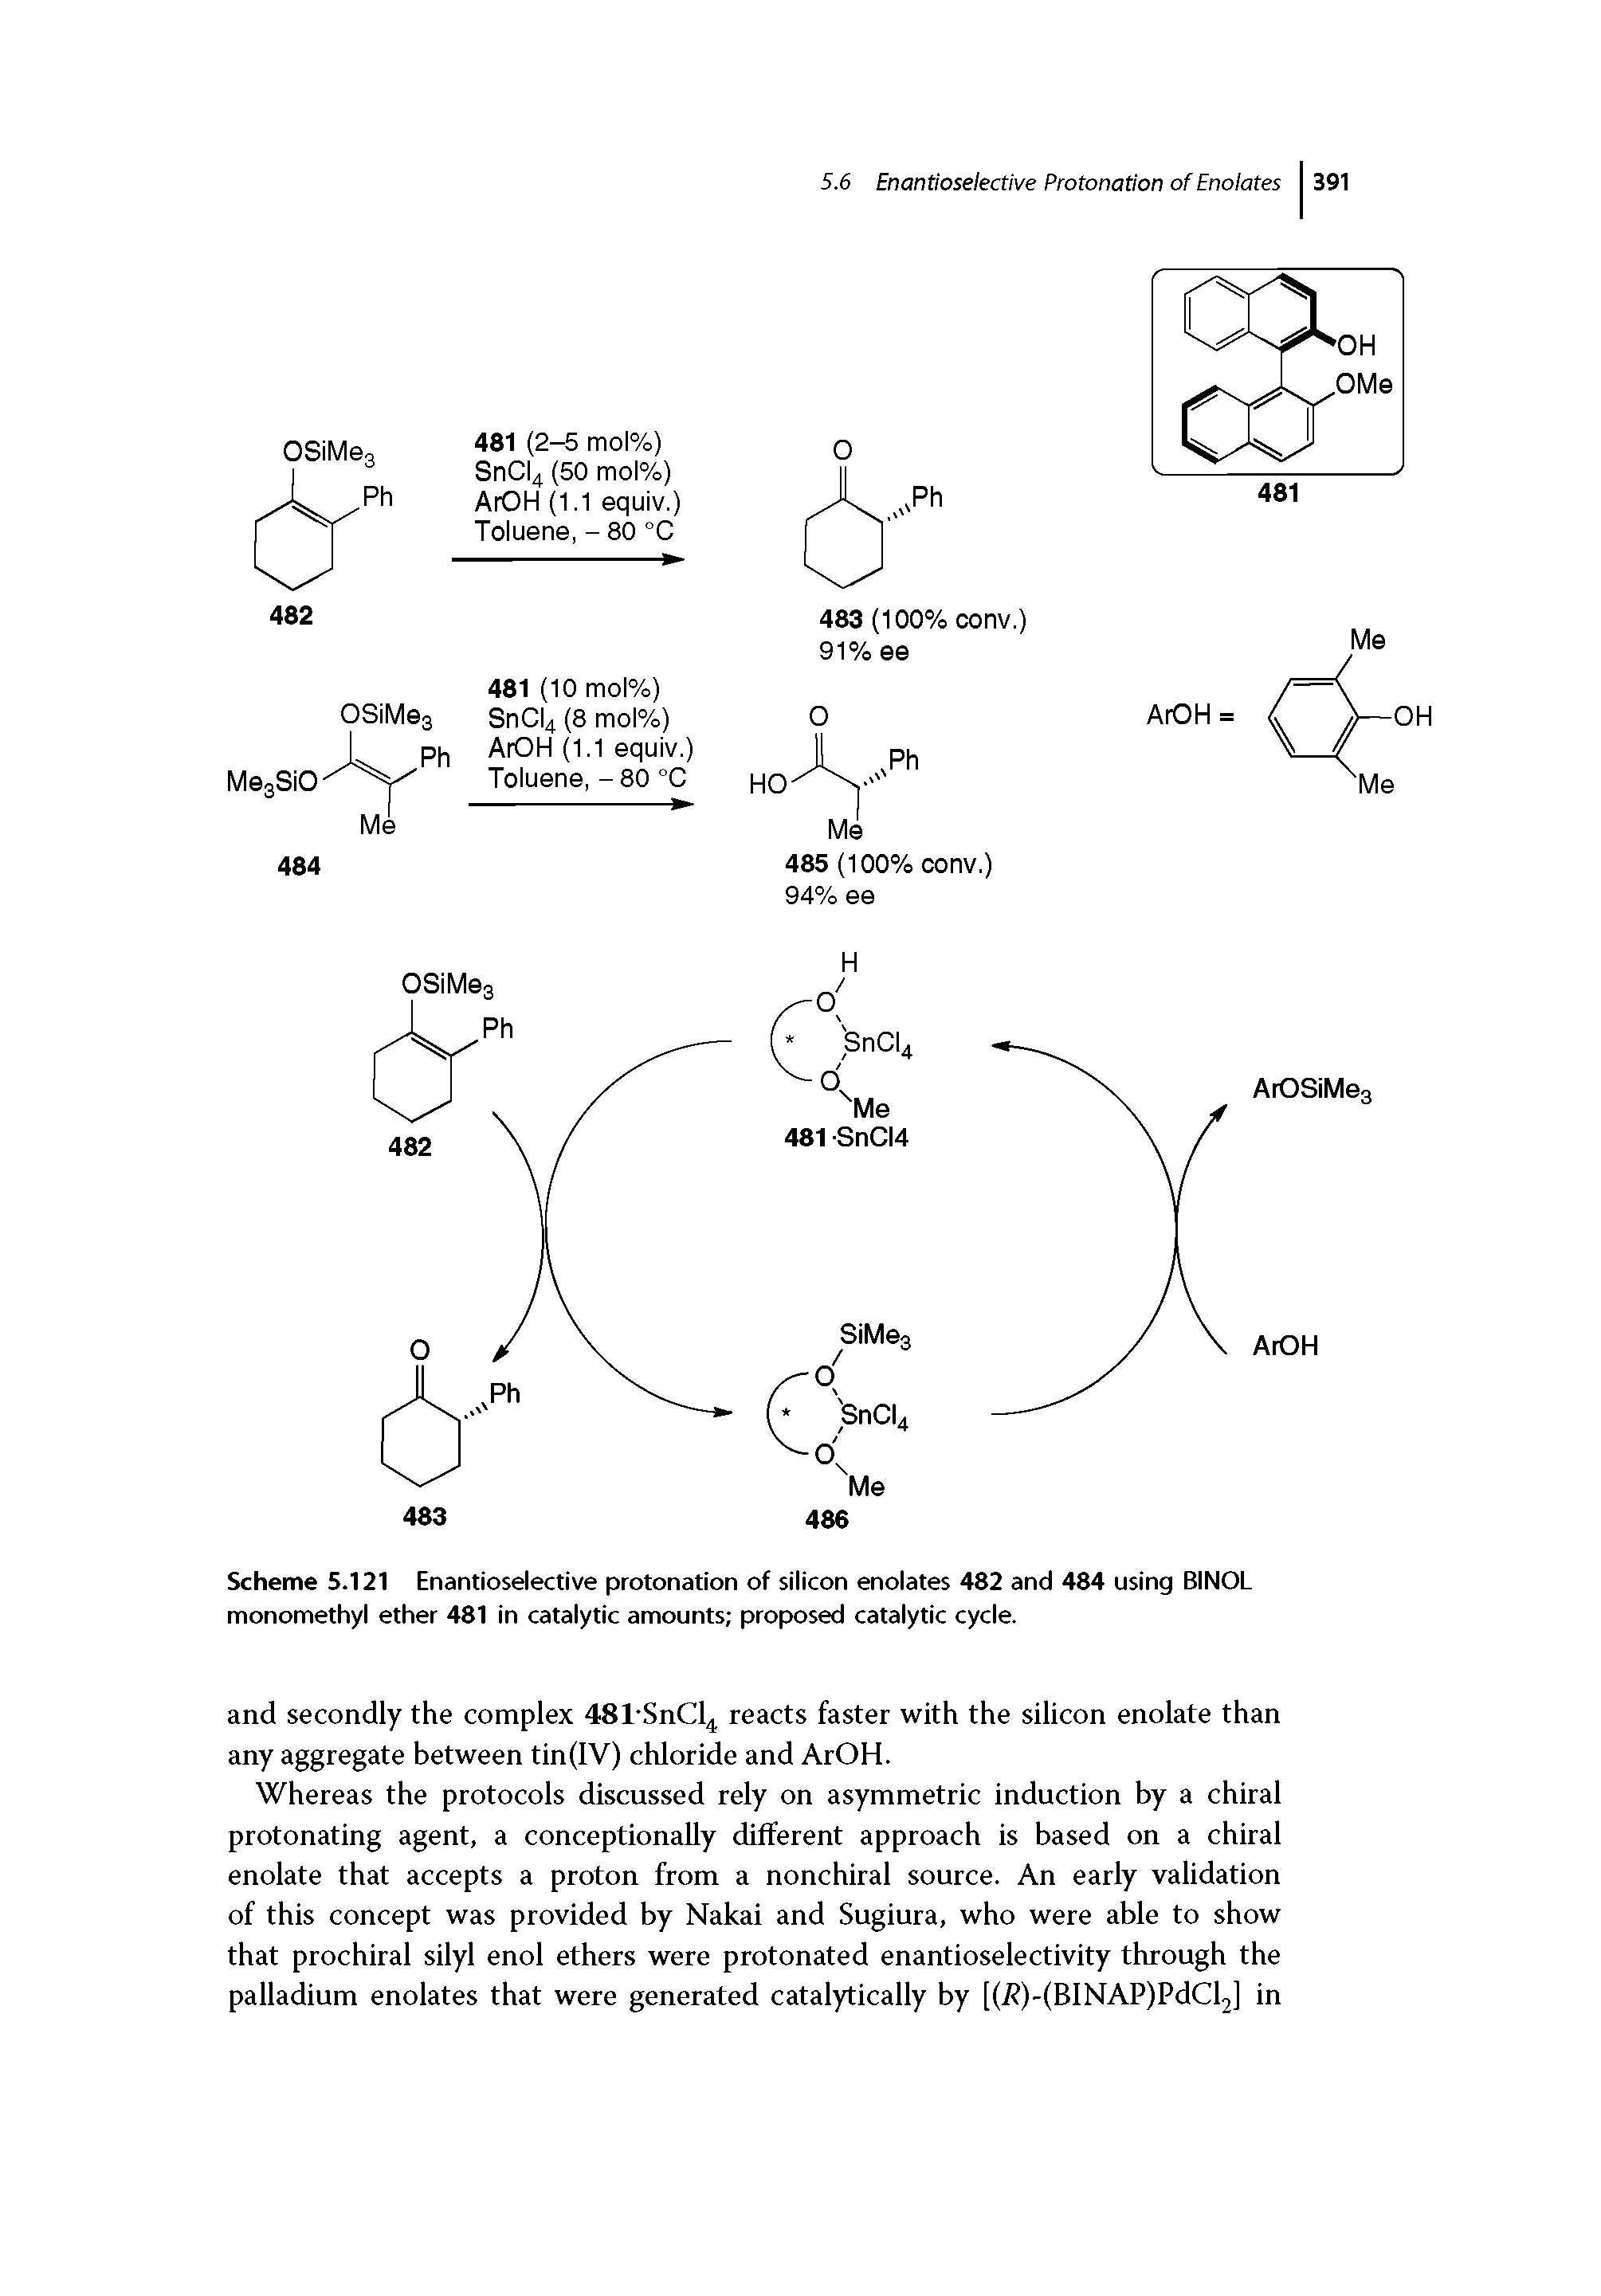 Scheme 5.121 Enantioselective protonation of silicon enolates 482 and 484 using BINOL monomethyl ether 481 in catalytic amounts proposed catalytic cycle.